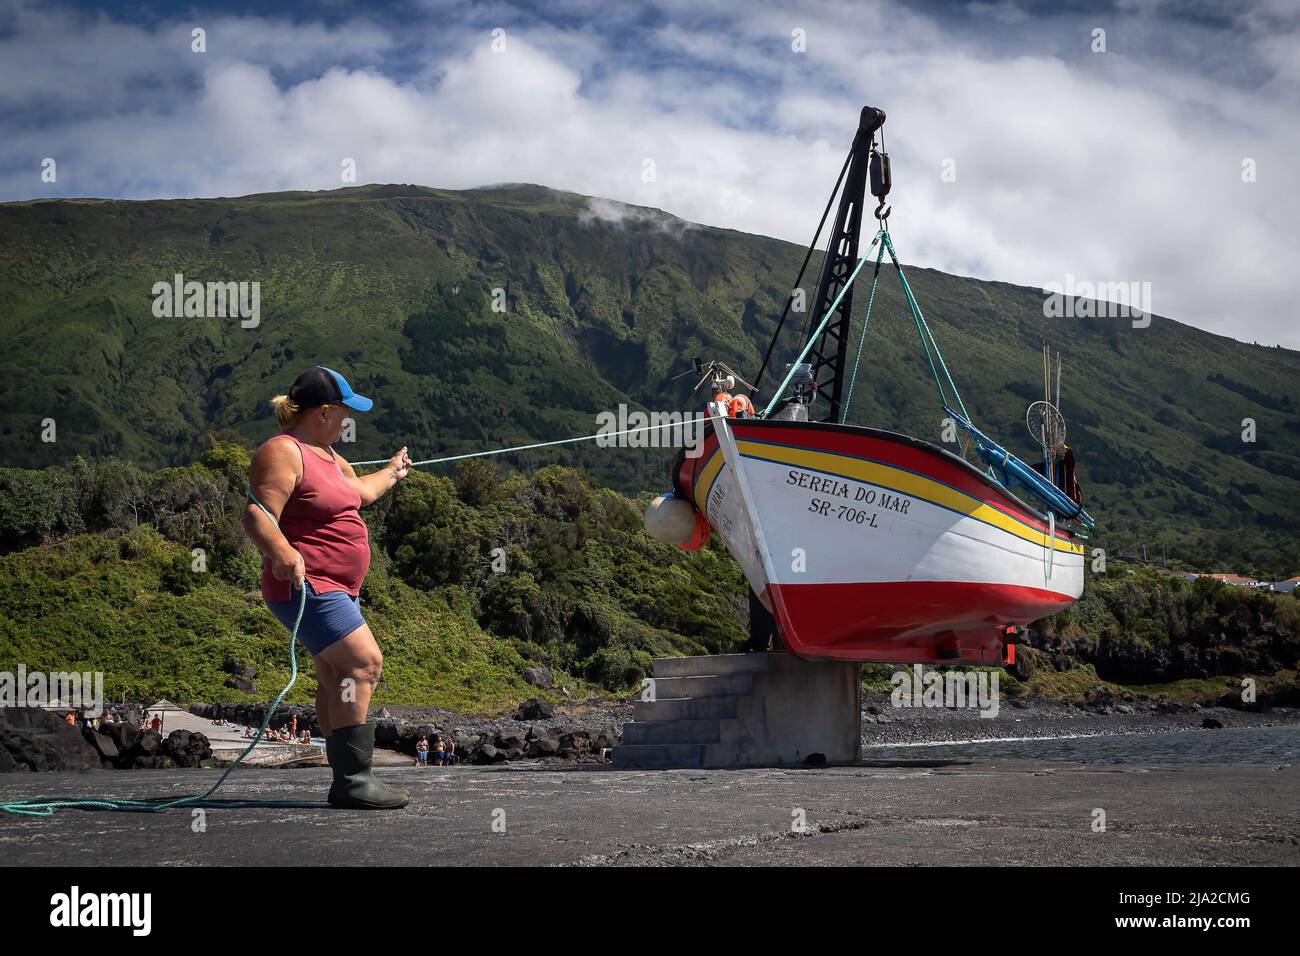 Portugal. 16th Aug, 2021. At the end of another fishing session, a fisherwoman pulls the boat into the port of S. Caetano, on the island of Pico. Women are well present in the fishing industry in the Azores islands, but only a few venture to the sea. Mostly work on land preparing baits and nets and cleaning or selling fish. Today, there are only five fisherwomen that go into the sea, making them probably the last fisherwomen in the archipelago. (Photo by Eduardo Leal/SOPA Images/Sipa USA) Credit: Sipa USA/Alamy Live News Stock Photo